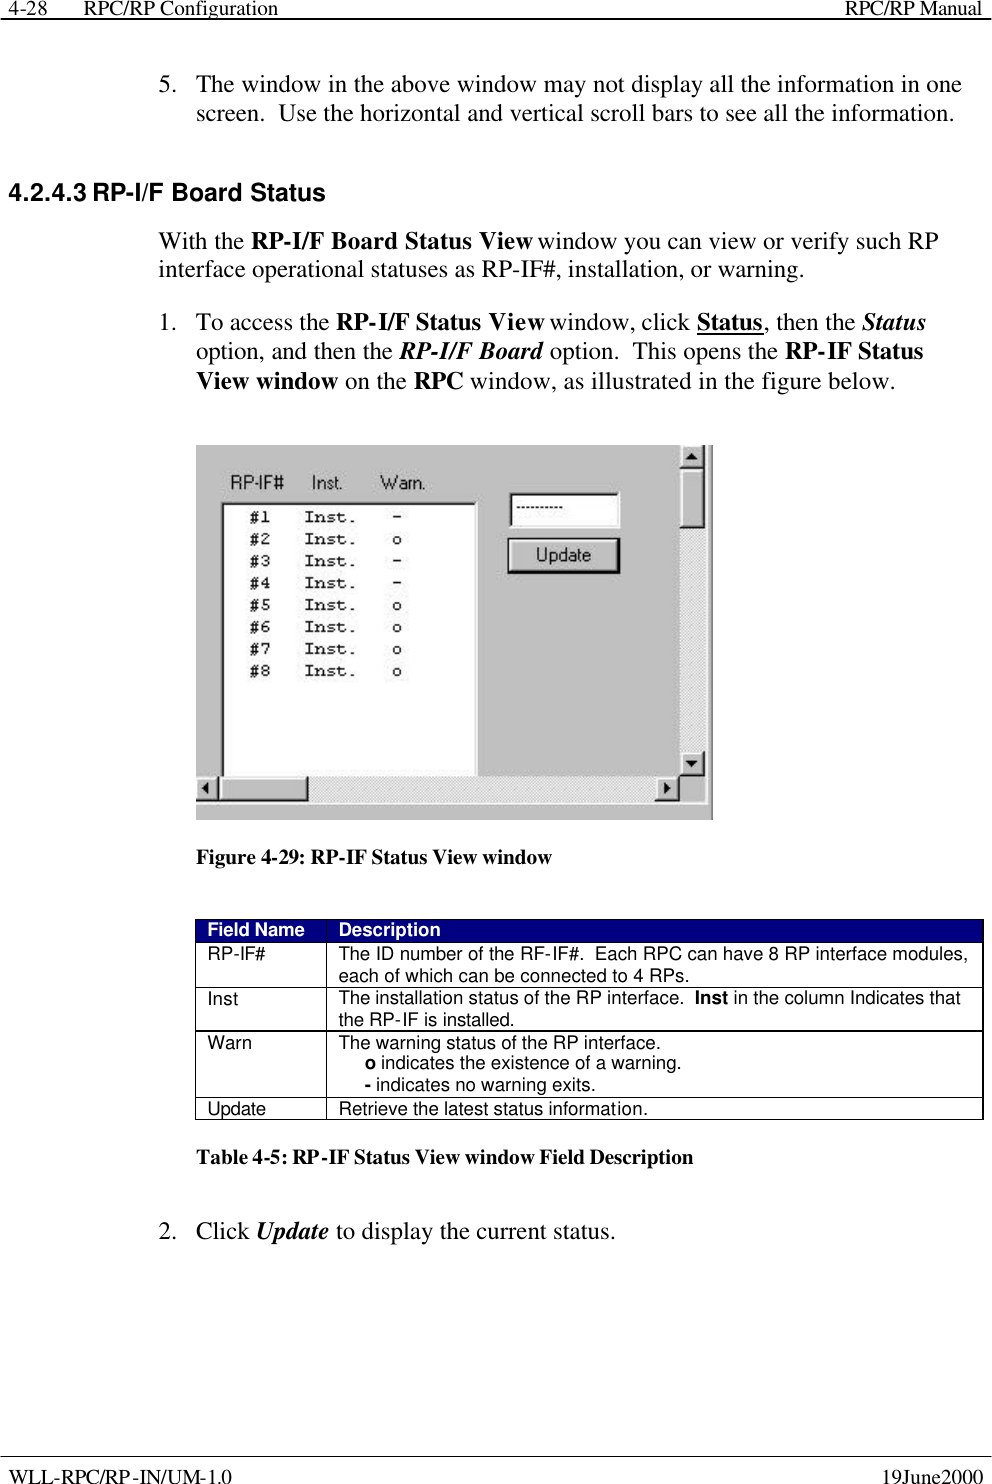  RPC/RP Configuration    RPC/RP Manual   WLL-RPC/RP-IN/UM-1.0    19June2000 4-285.  The window in the above window may not display all the information in one screen.  Use the horizontal and vertical scroll bars to see all the information. 4.2.4.3 RP-I/F Board Status With the RP-I/F Board Status View window you can view or verify such RP interface operational statuses as RP-IF#, installation, or warning. 1.  To access the RP-I/F Status View window, click Status, then the Status option, and then the RP-I/F Board option.  This opens the RP-IF Status View window on the RPC window, as illustrated in the figure below.  Figure 4-29: RP-IF Status View window Field Name Description RP-IF# The ID number of the RF-IF#.  Each RPC can have 8 RP interface modules, each of which can be connected to 4 RPs. Inst The installation status of the RP interface.  Inst in the column Indicates that the RP-IF is installed. Warn The warning status of the RP interface.  o indicates the existence of a warning.   - indicates no warning exits. Update Retrieve the latest status information. Table 4-5: RP-IF Status View window Field Description 2.  Click Update to display the current status. 